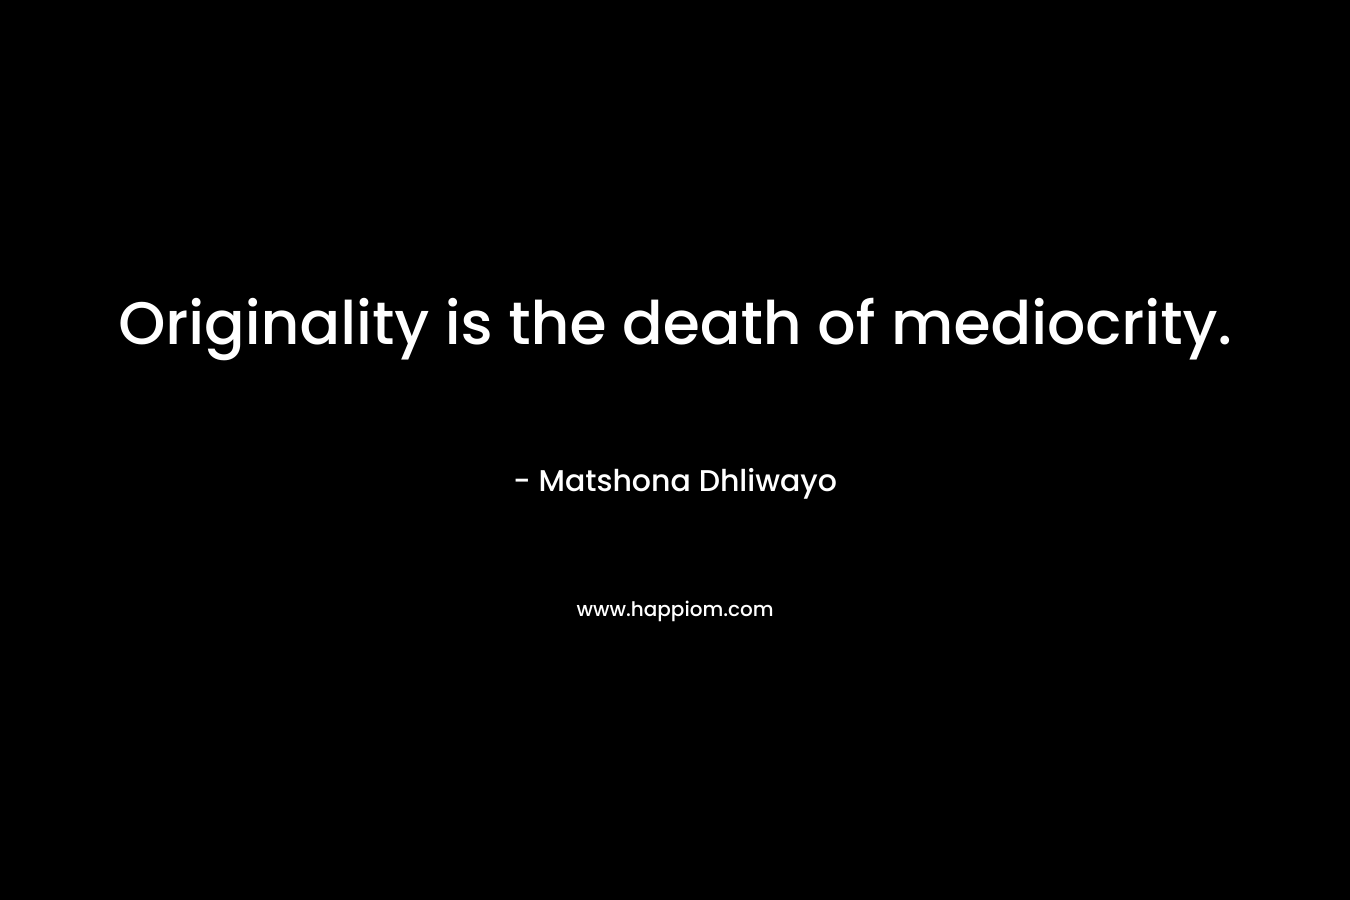 Originality is the death of mediocrity.